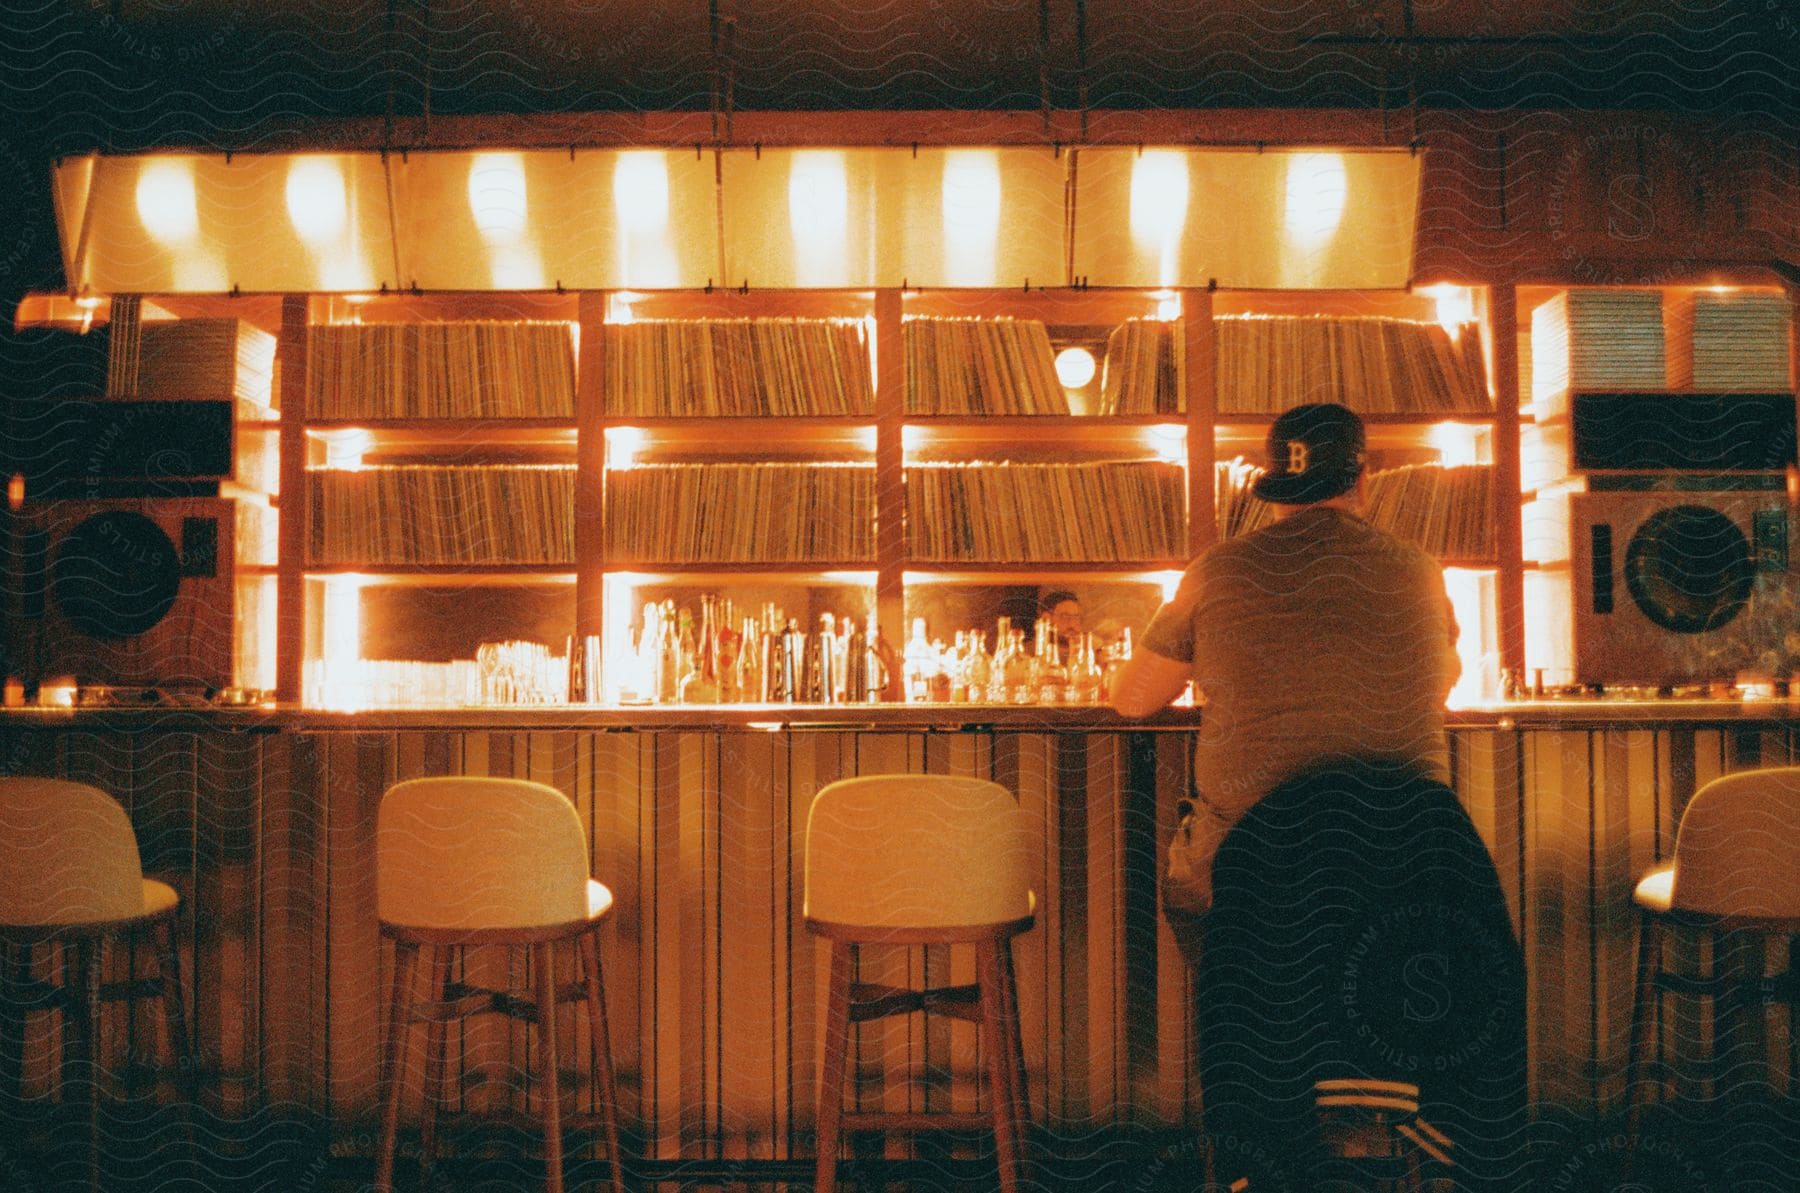 Man sitting in a chair facing a bar counter with drinks.